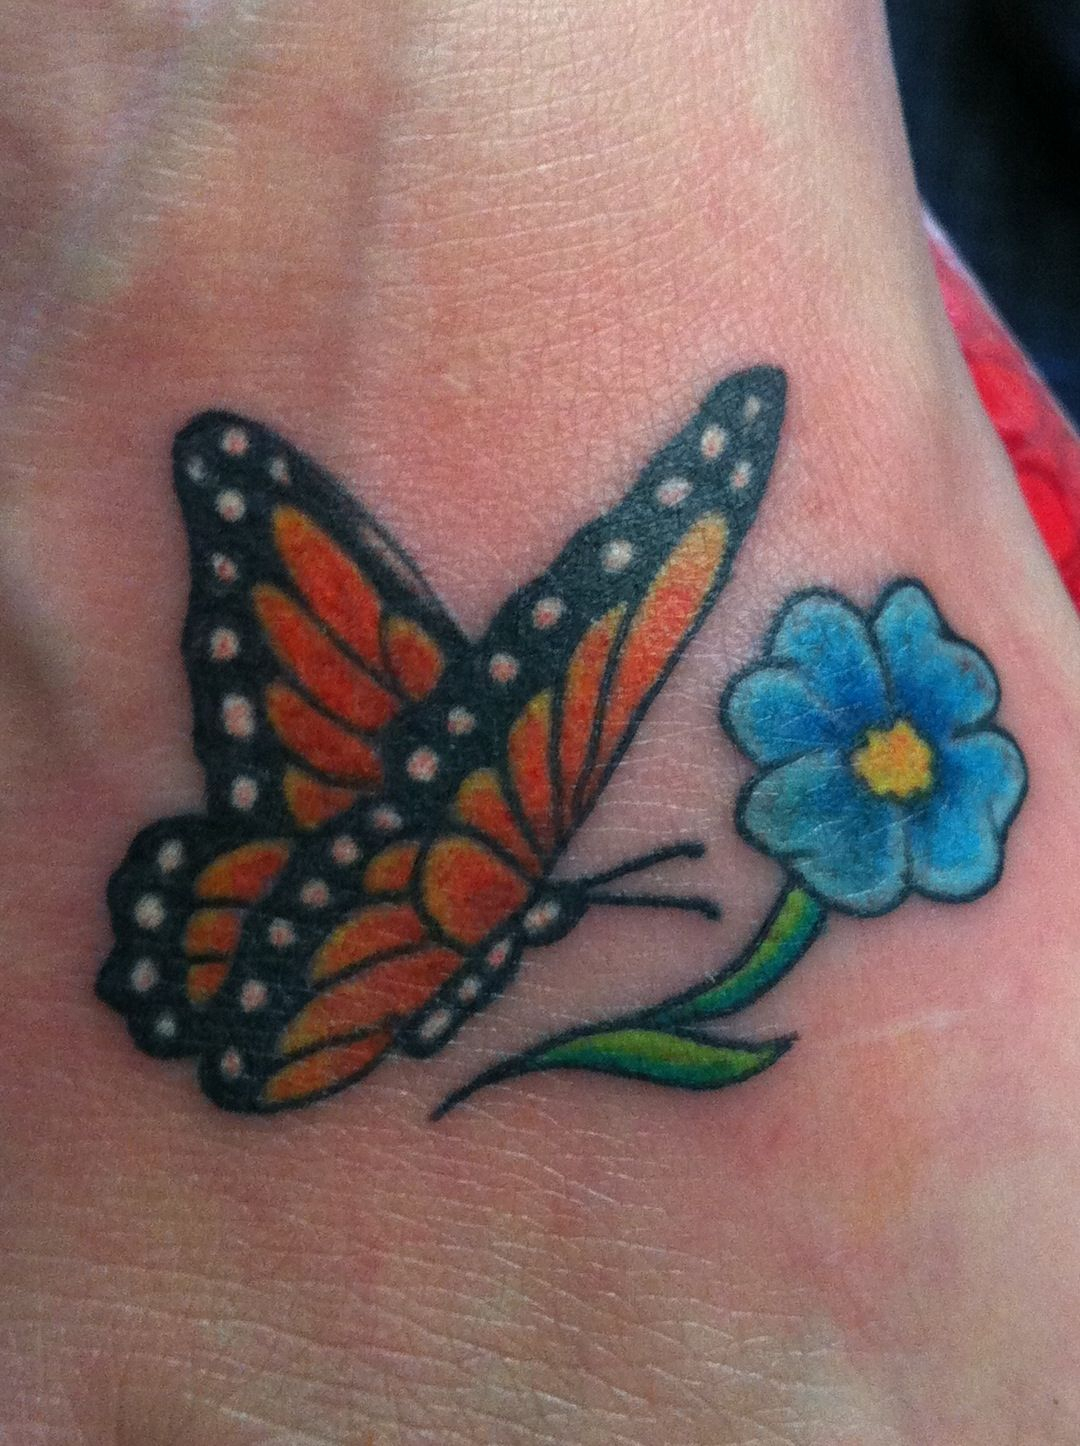 Monarch Butterfly Tattoo And Forget Me Not Flower In Memory Of A within siz...